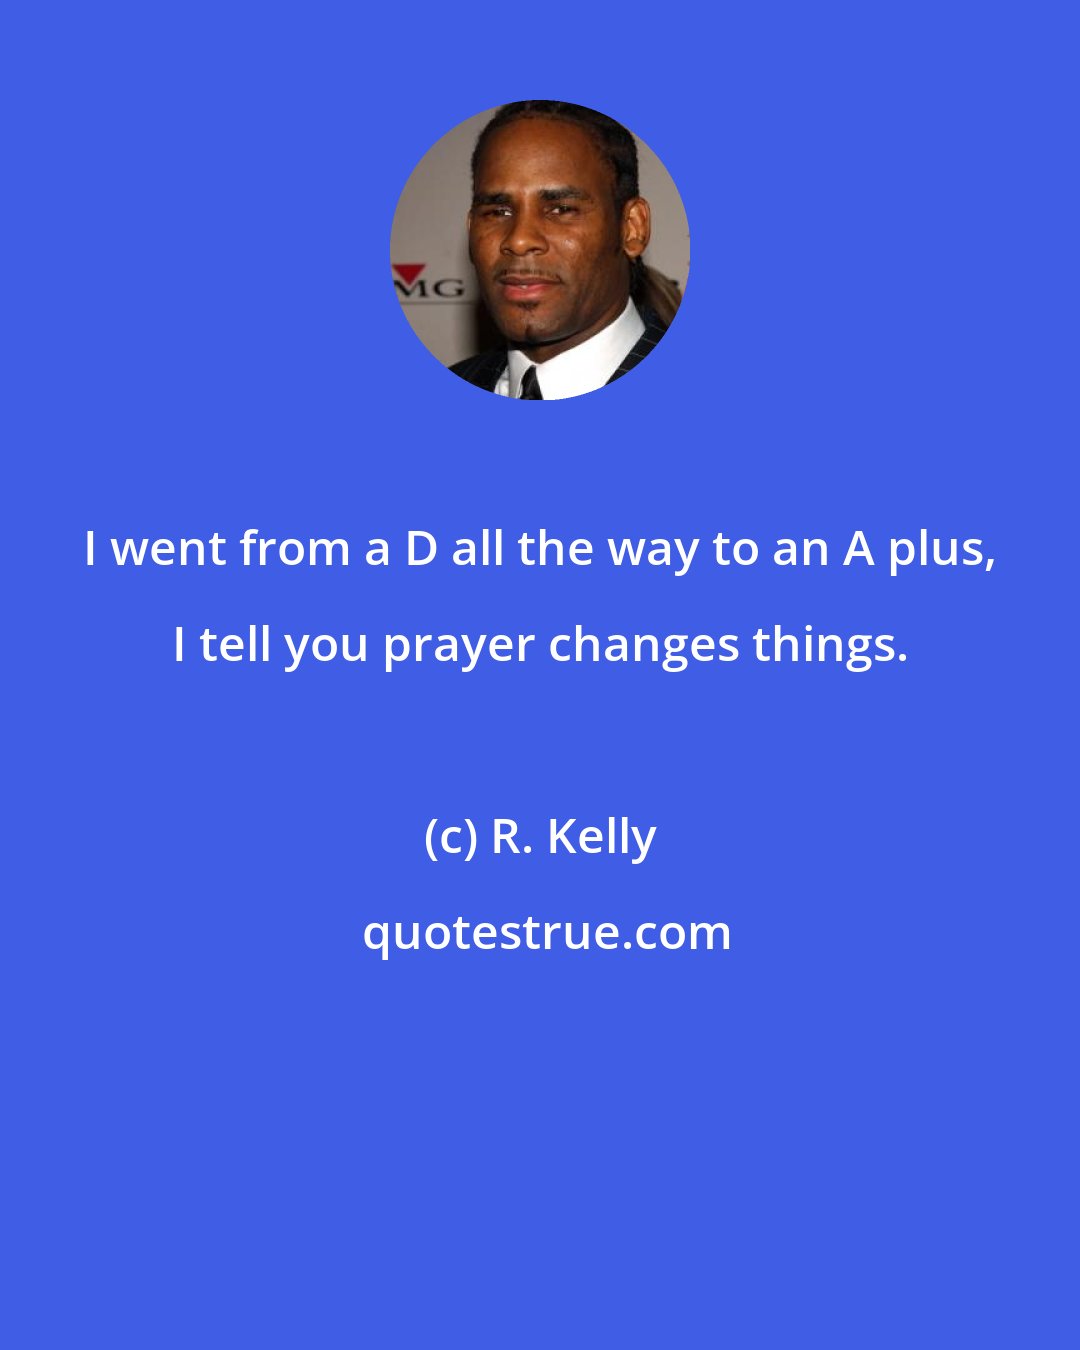 R. Kelly: I went from a D all the way to an A plus, I tell you prayer changes things.